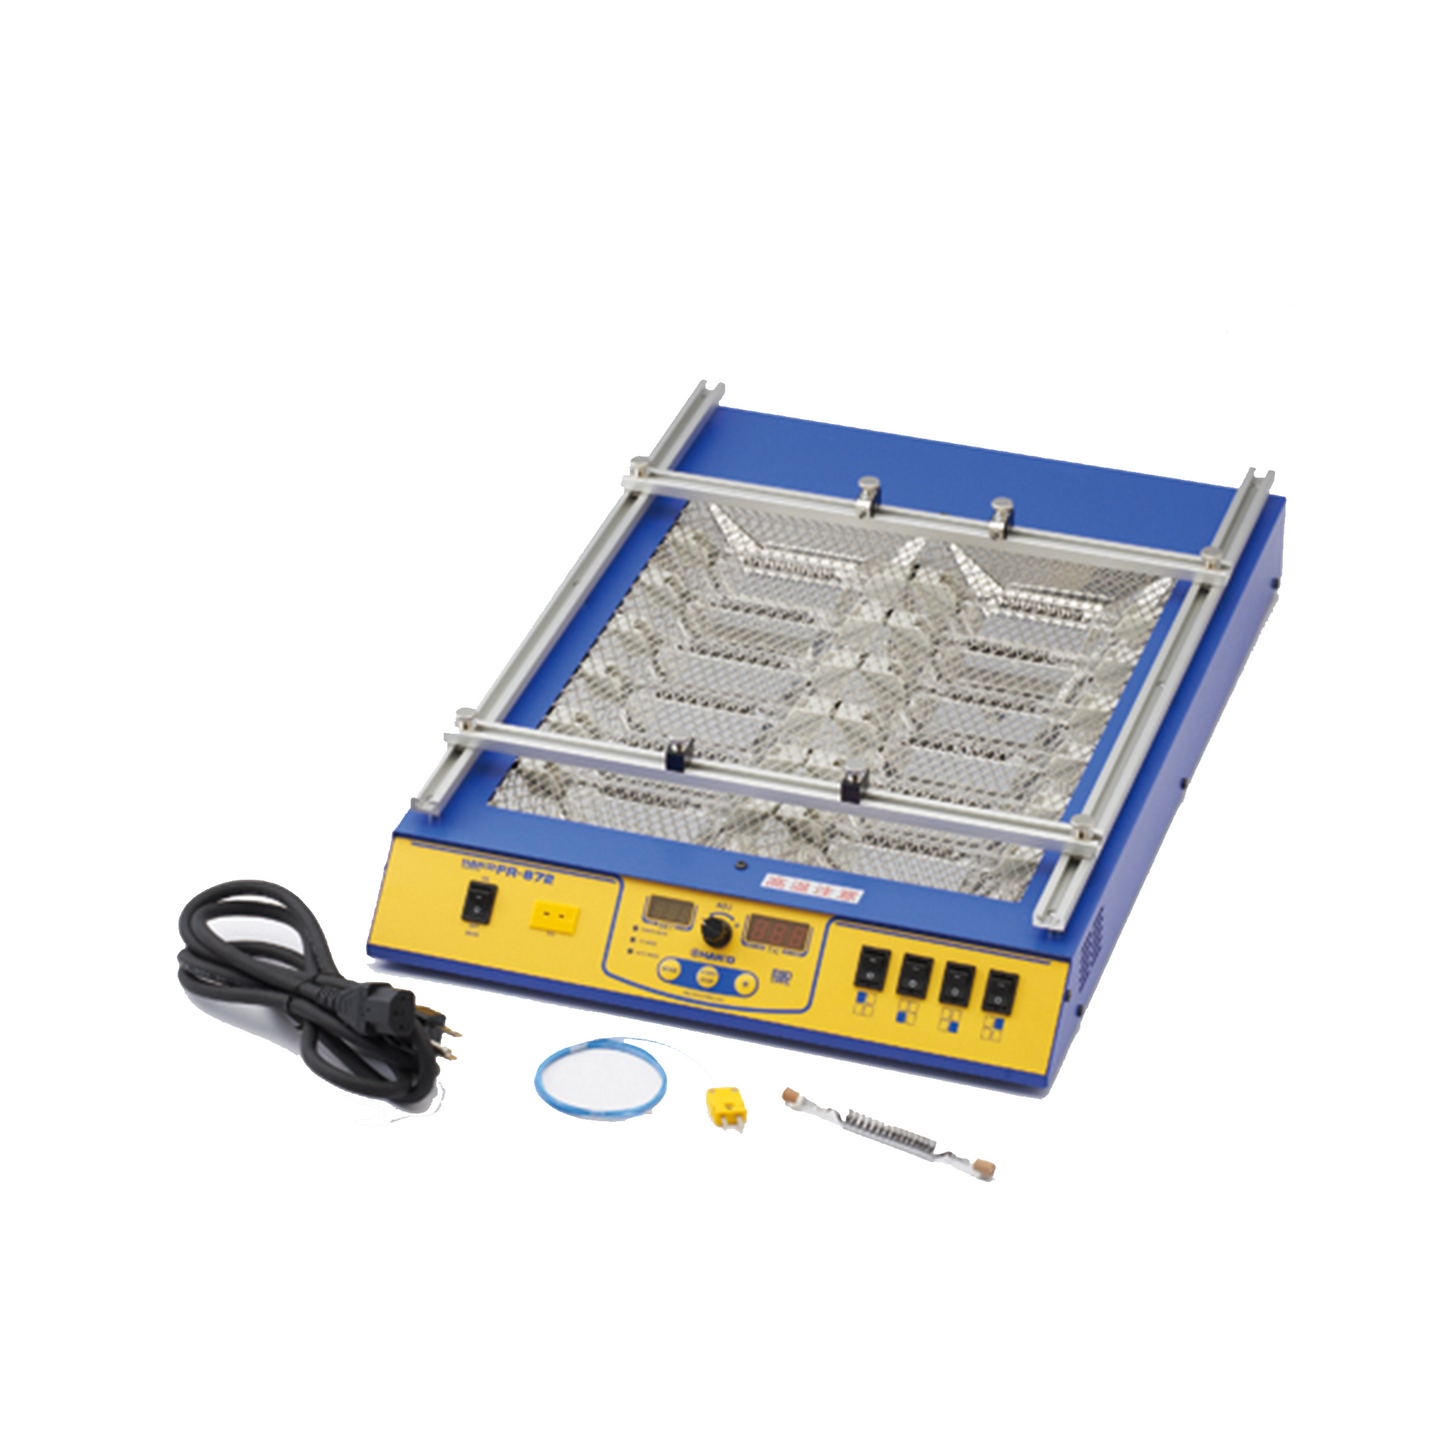 Hakko FR872 Desoldering/Rework Preheater Preheating Station for SMD components PCB SMT assembly production line